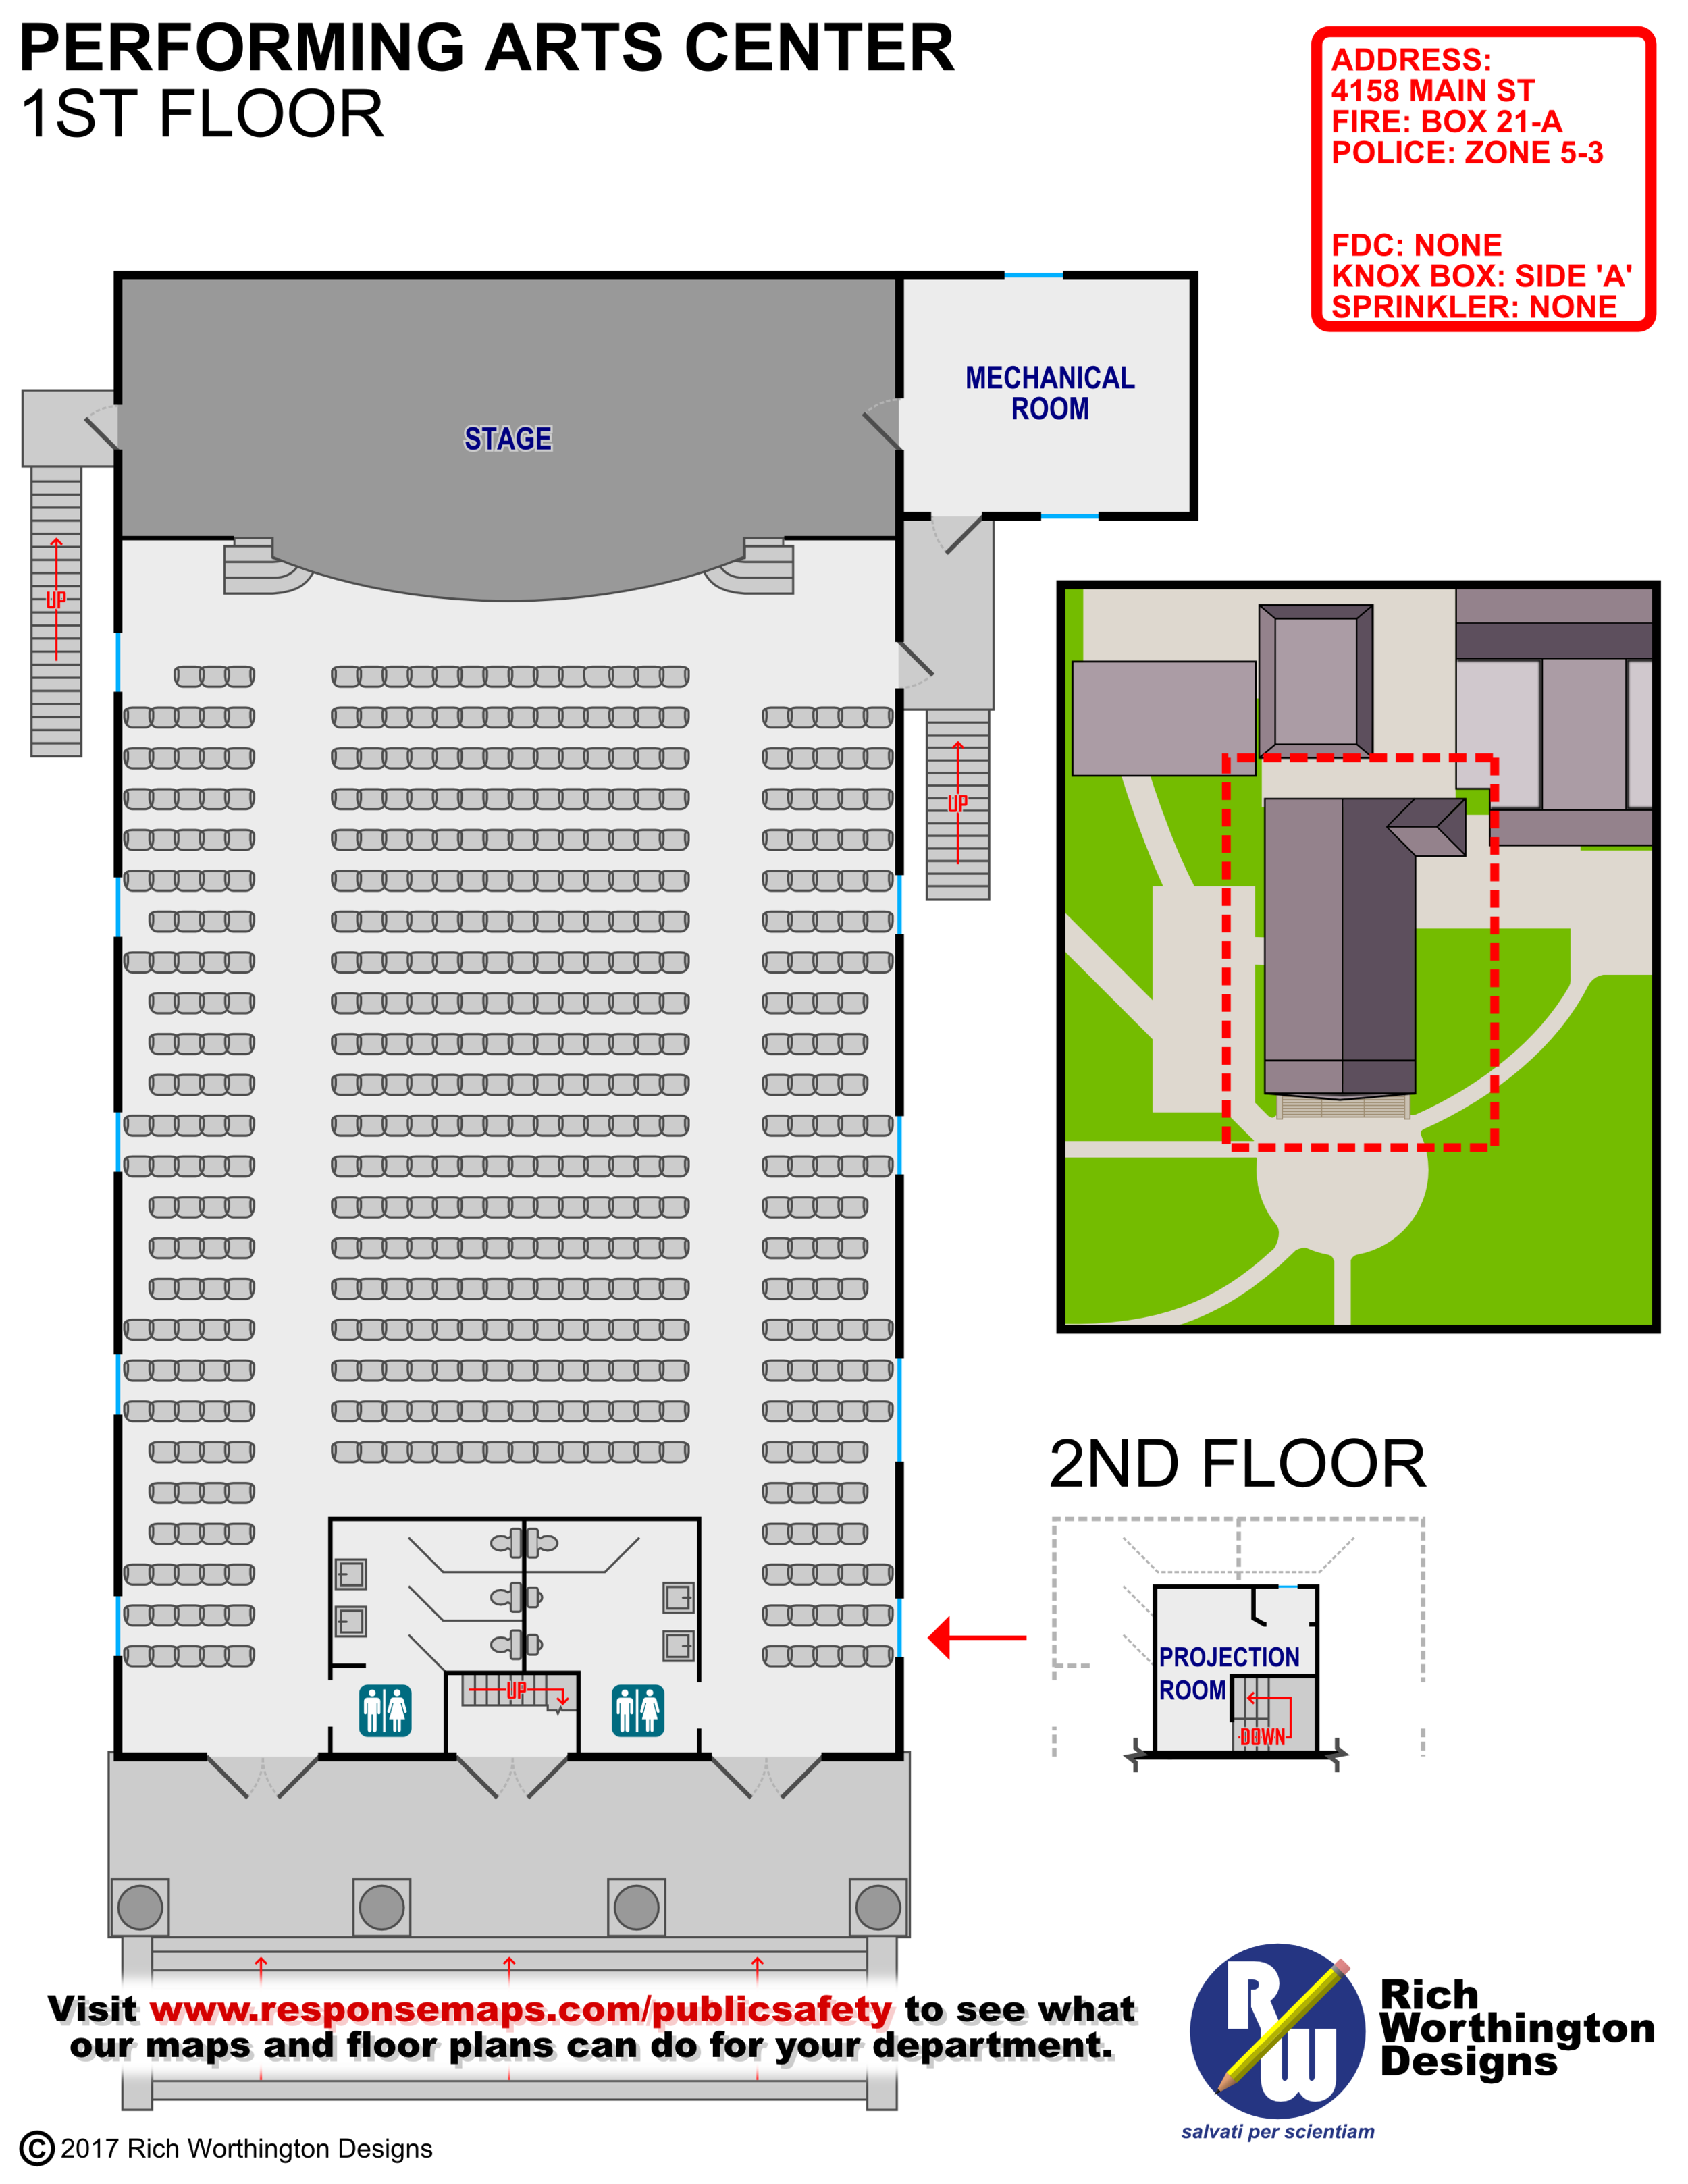 Performing Arts Center, 1st Floor.png